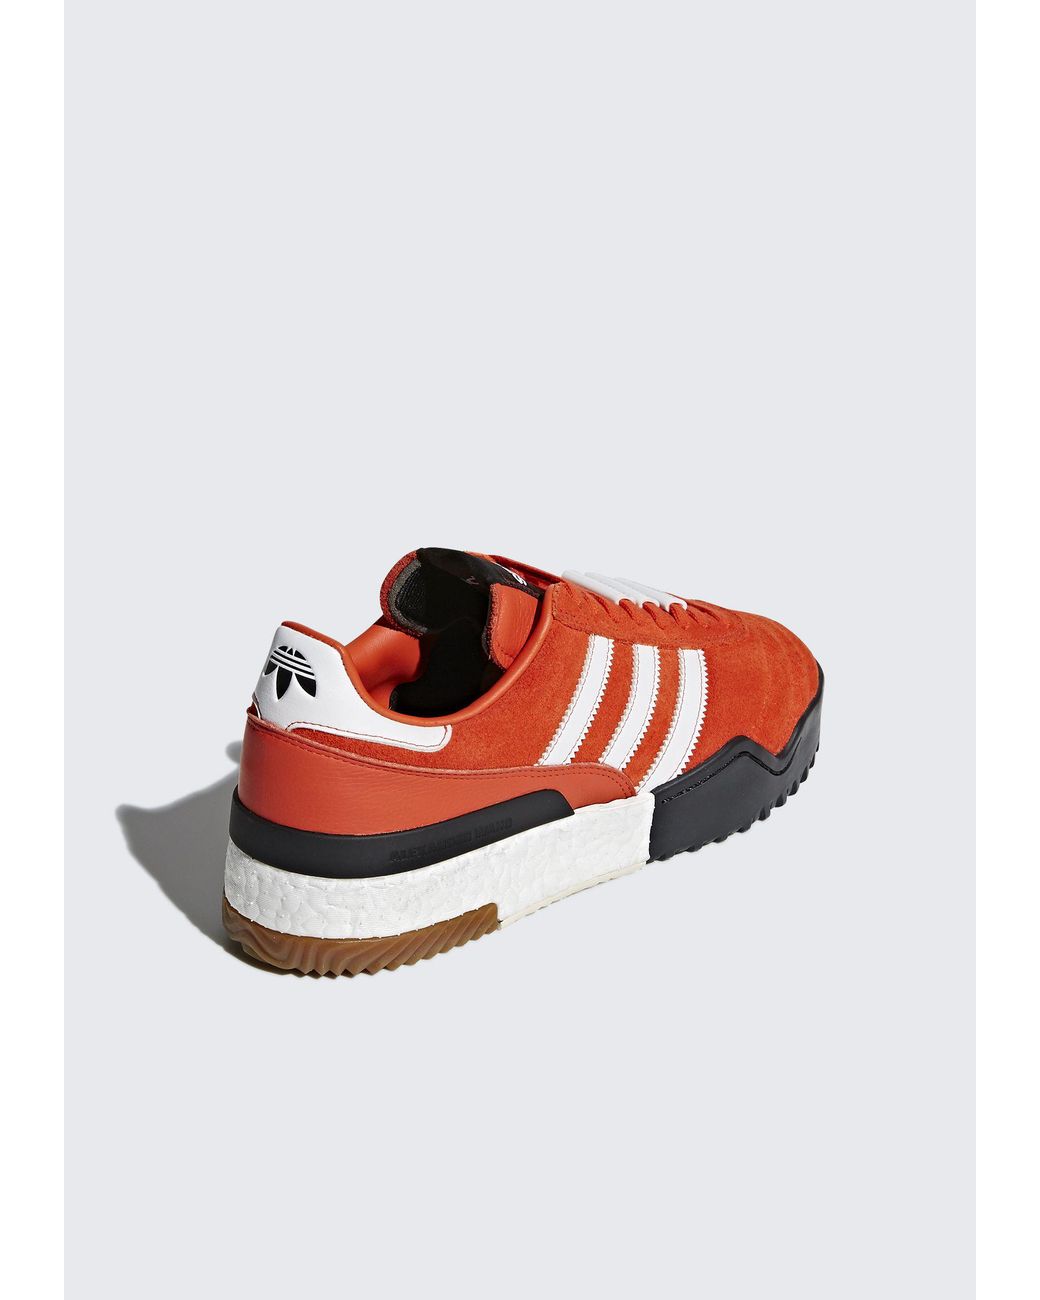 Alexander Wang Suede Adidas Originals By Aw Bball Soccer Shoes in Red | Lyst